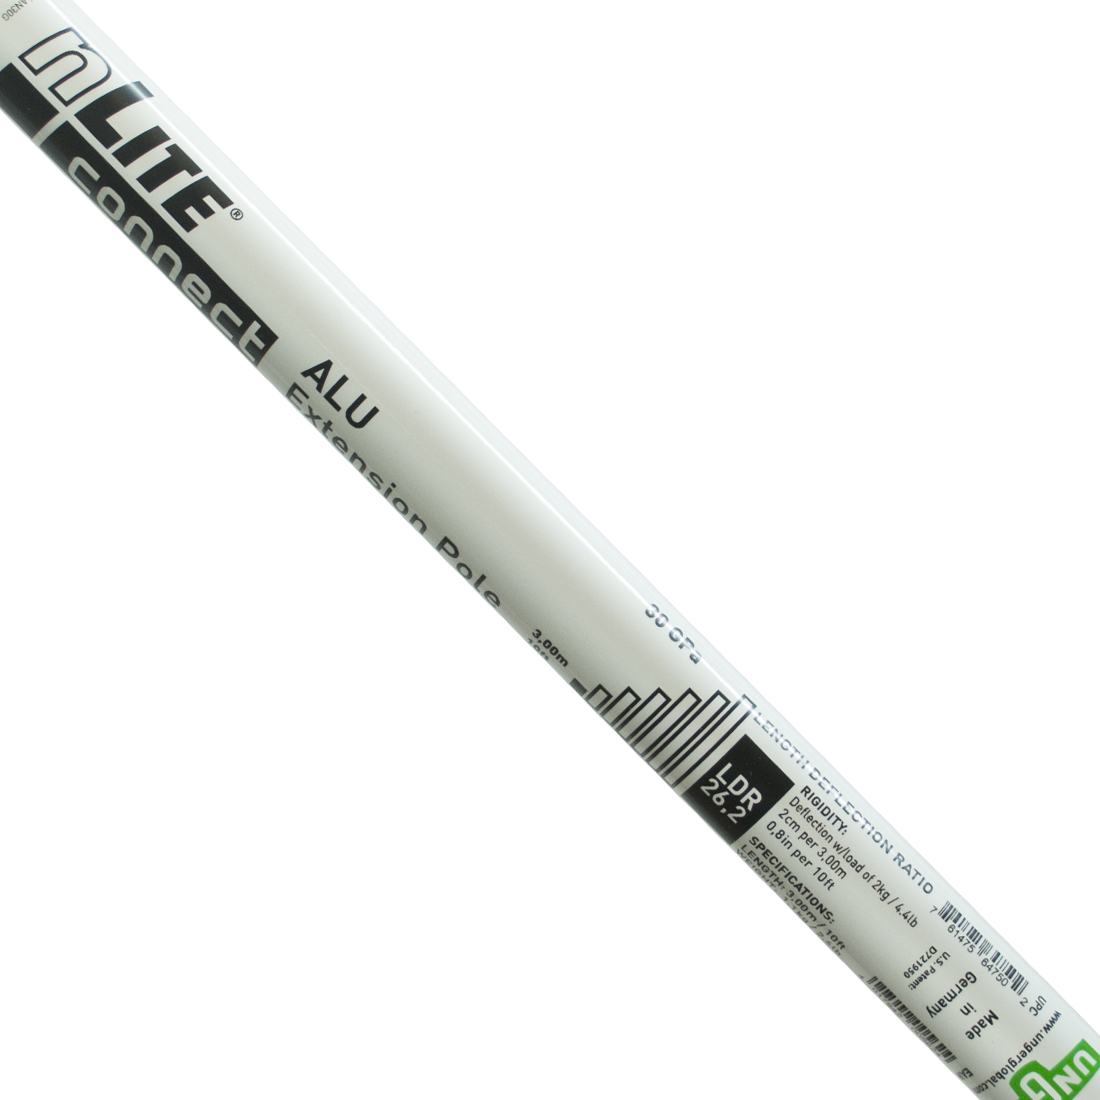 Unger nLite Aluminum Extension Pole - 10 Foot - Decal Close-Up View